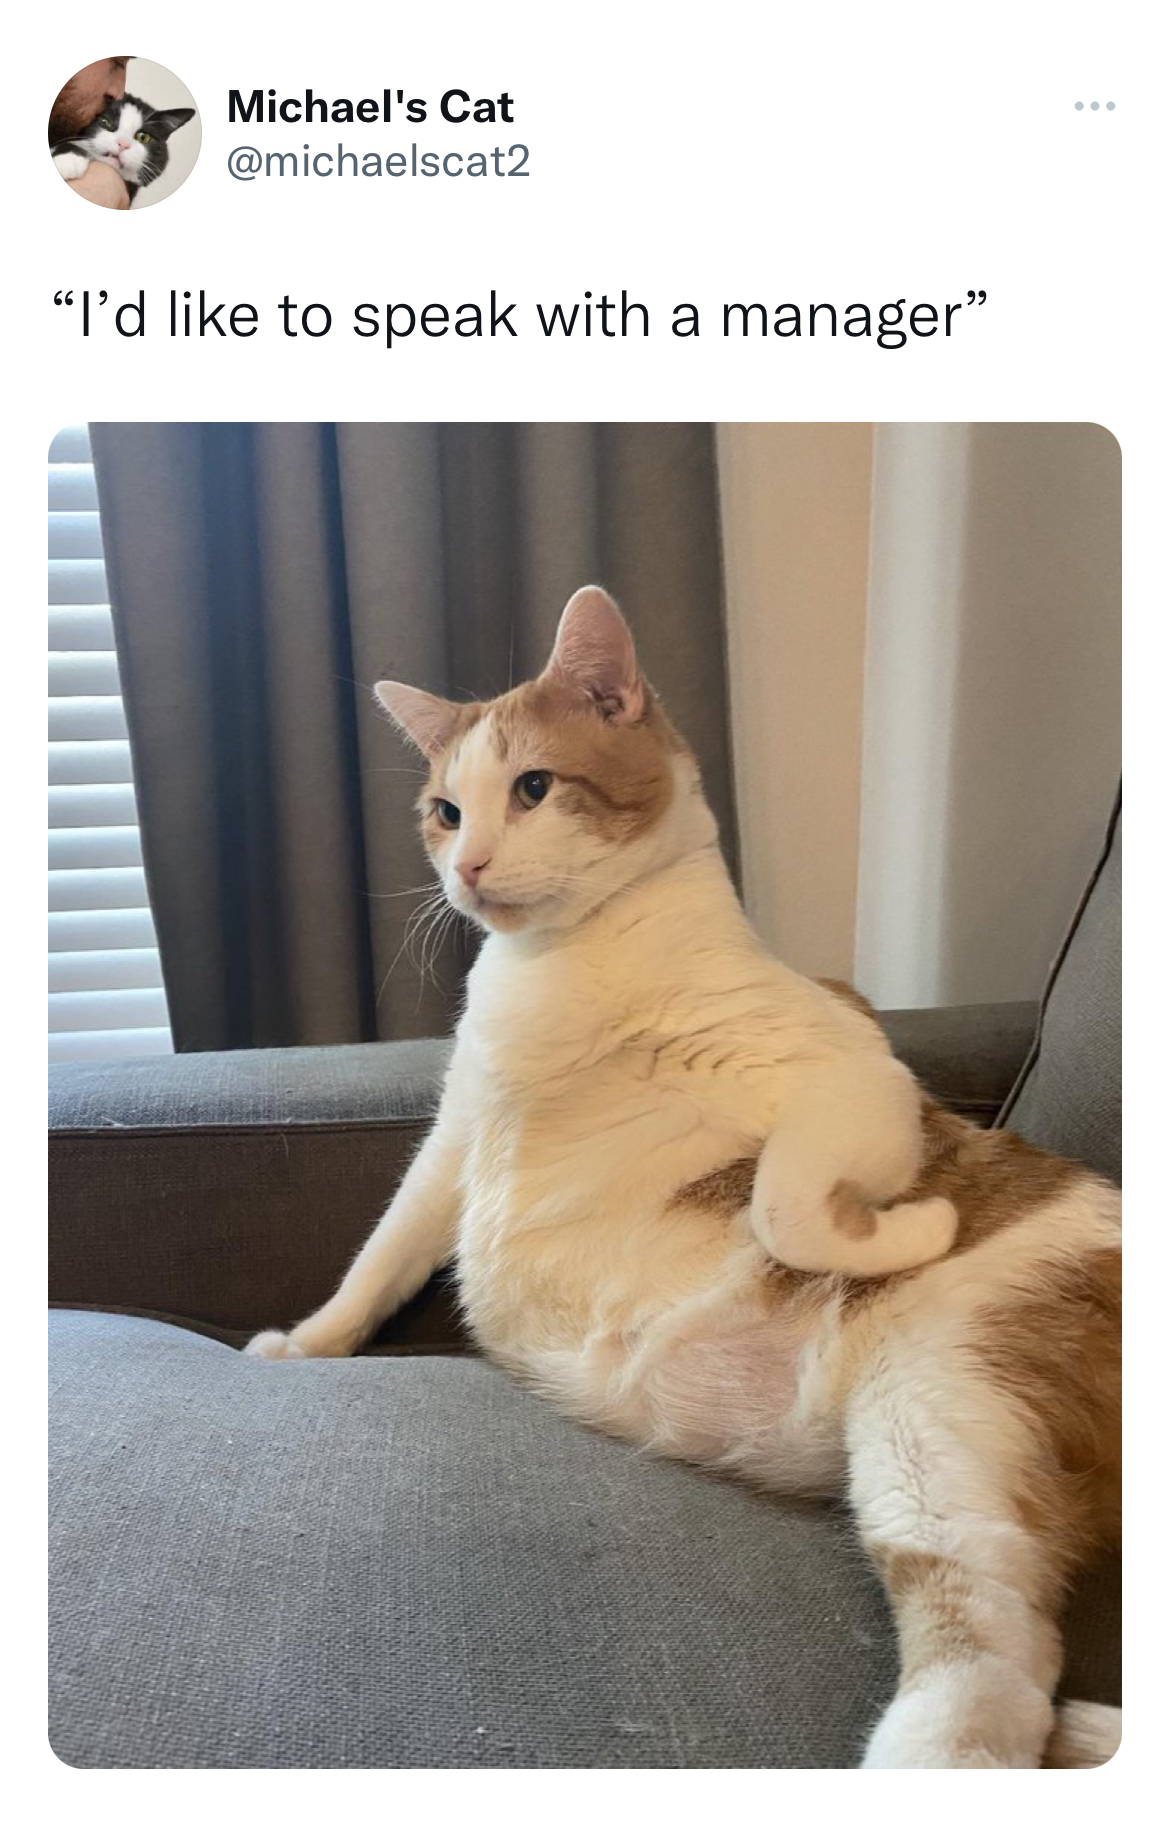 Savage and funny tweets - photo caption - Michael's Cat "I'd to speak with a manager" www